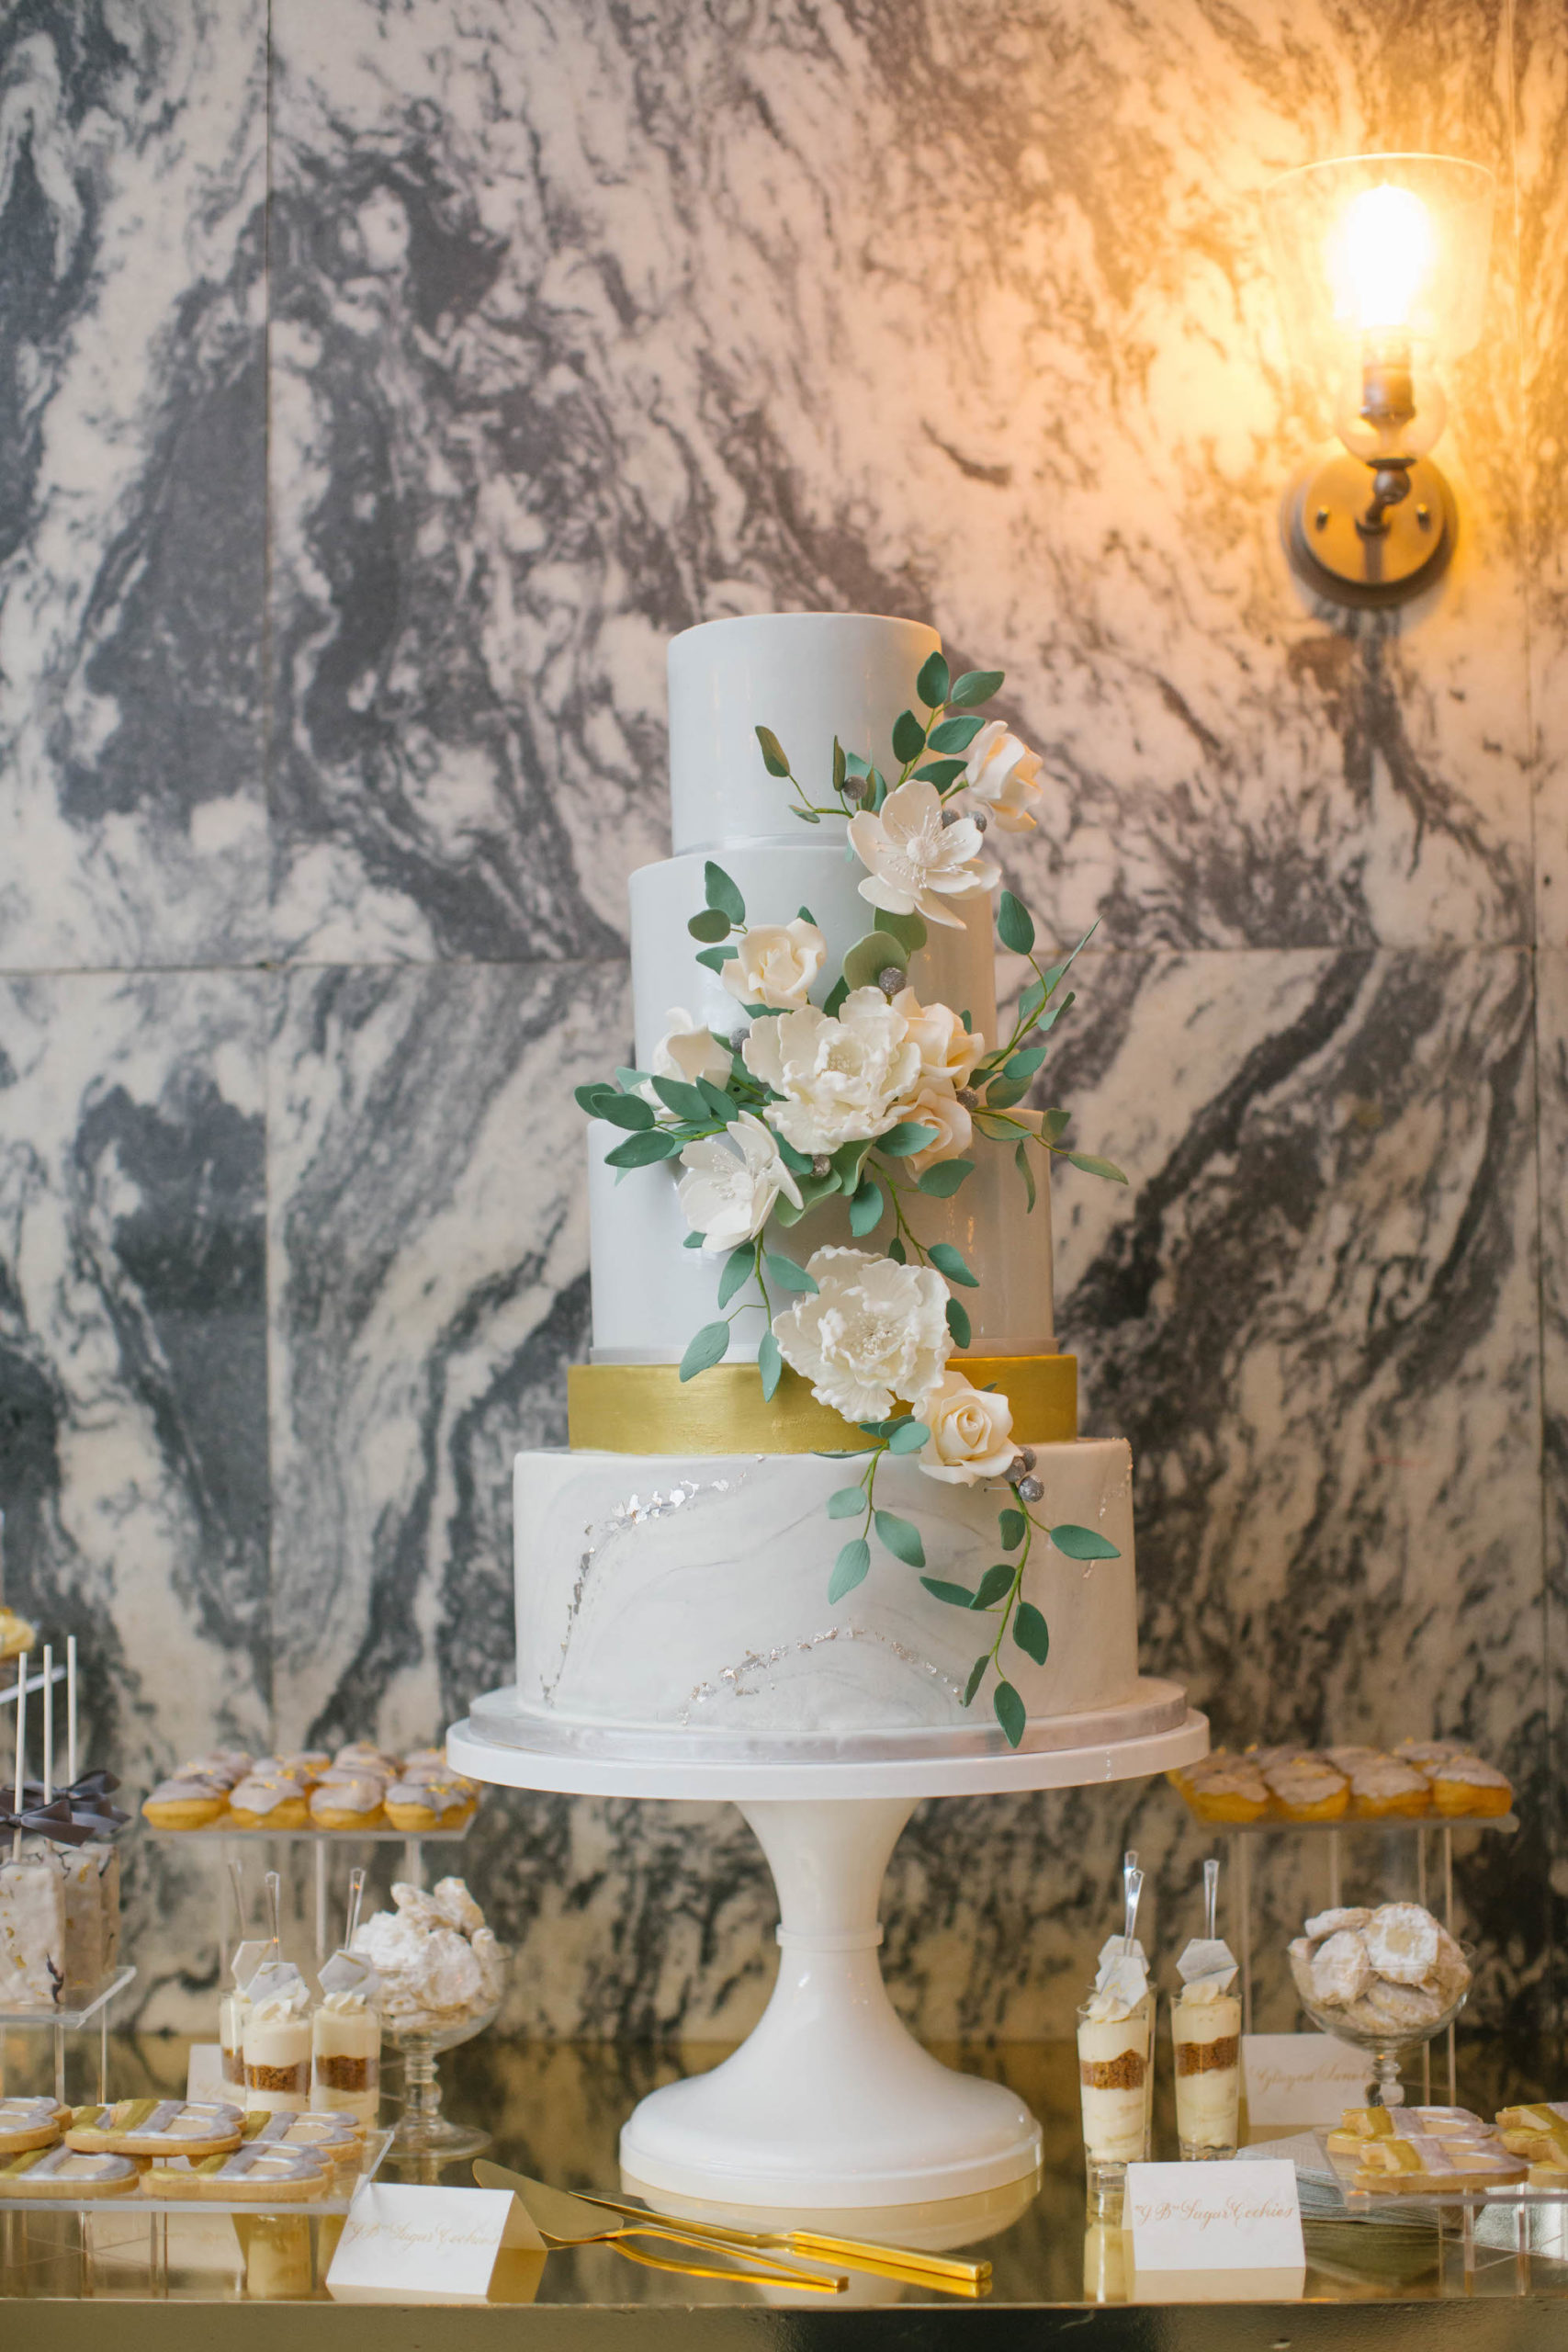 Elegant Four Tier White, Gold and Silver Wedding Cake with Cascading White and Greenery Florals on Dessert Table with Marble Background | Tampa Historic Courthouse Hotel Wedding Venue Le Meridien